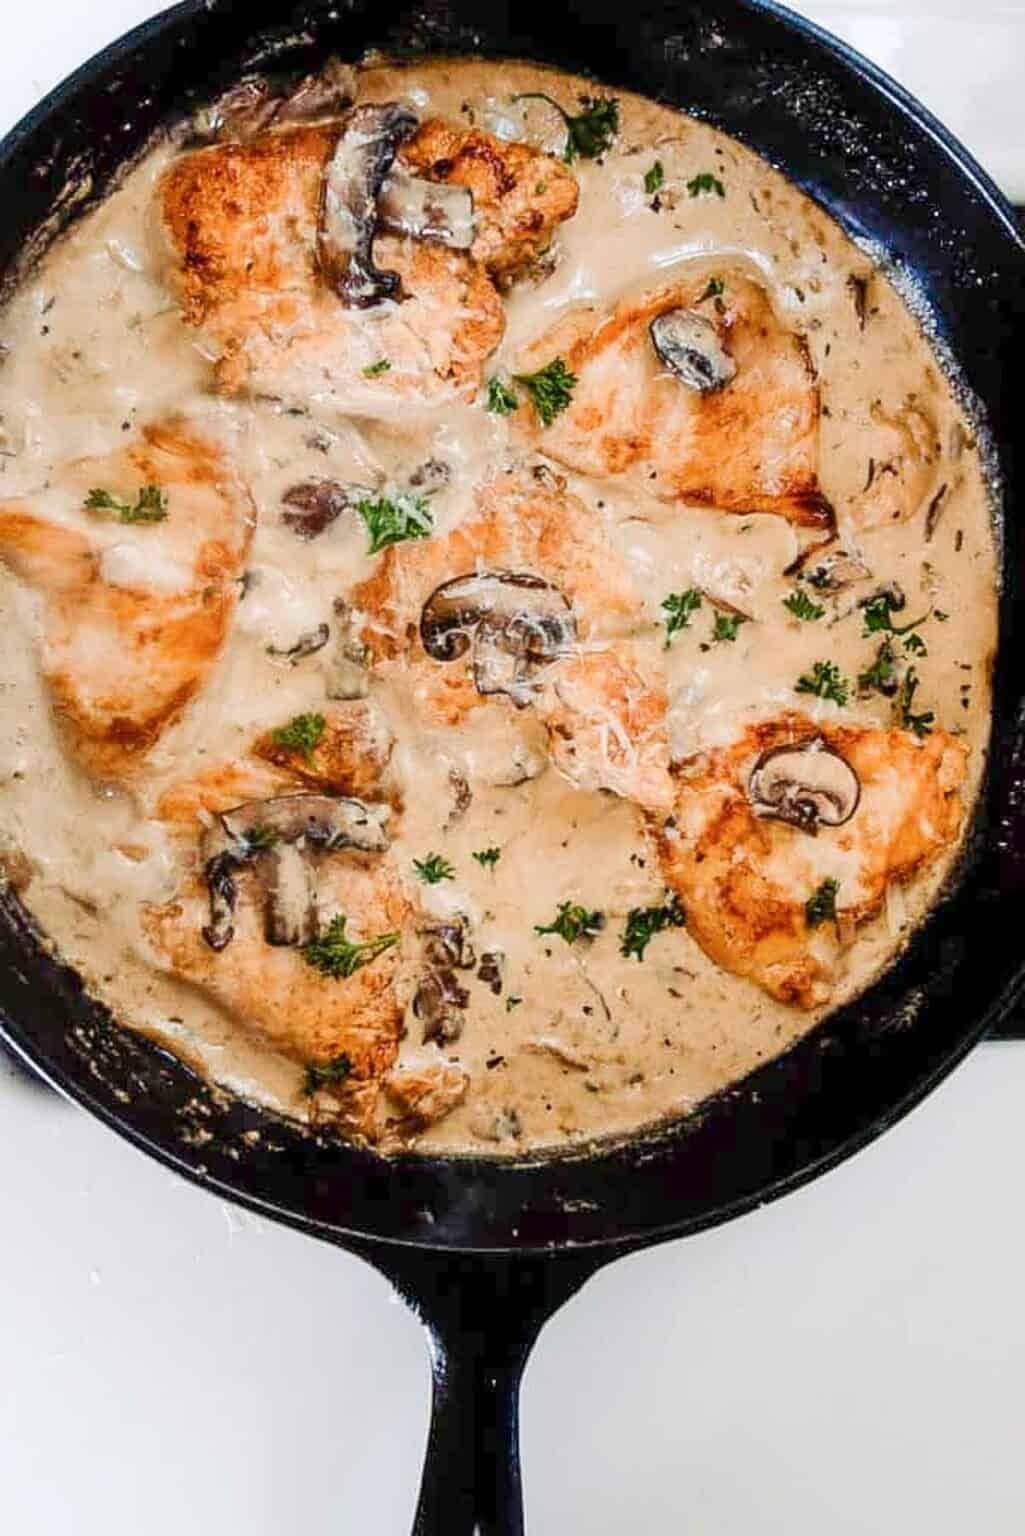 A skillet with chicken and mushrooms in a creamy sauce